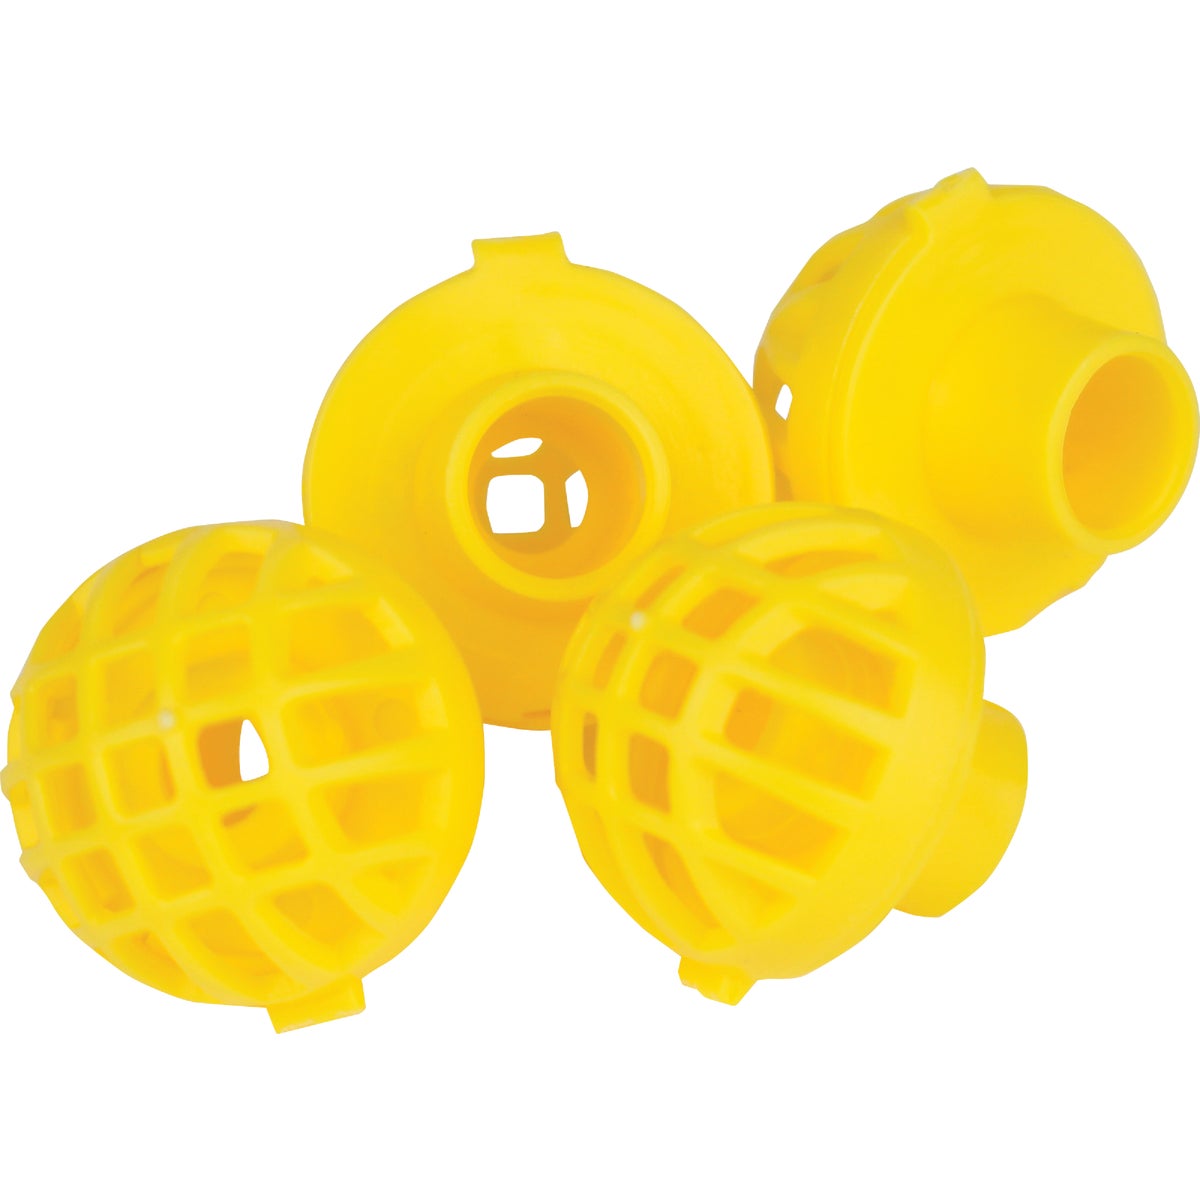 Item 700561, Perky-Pets replacement bee guards for hummingbird feeders.